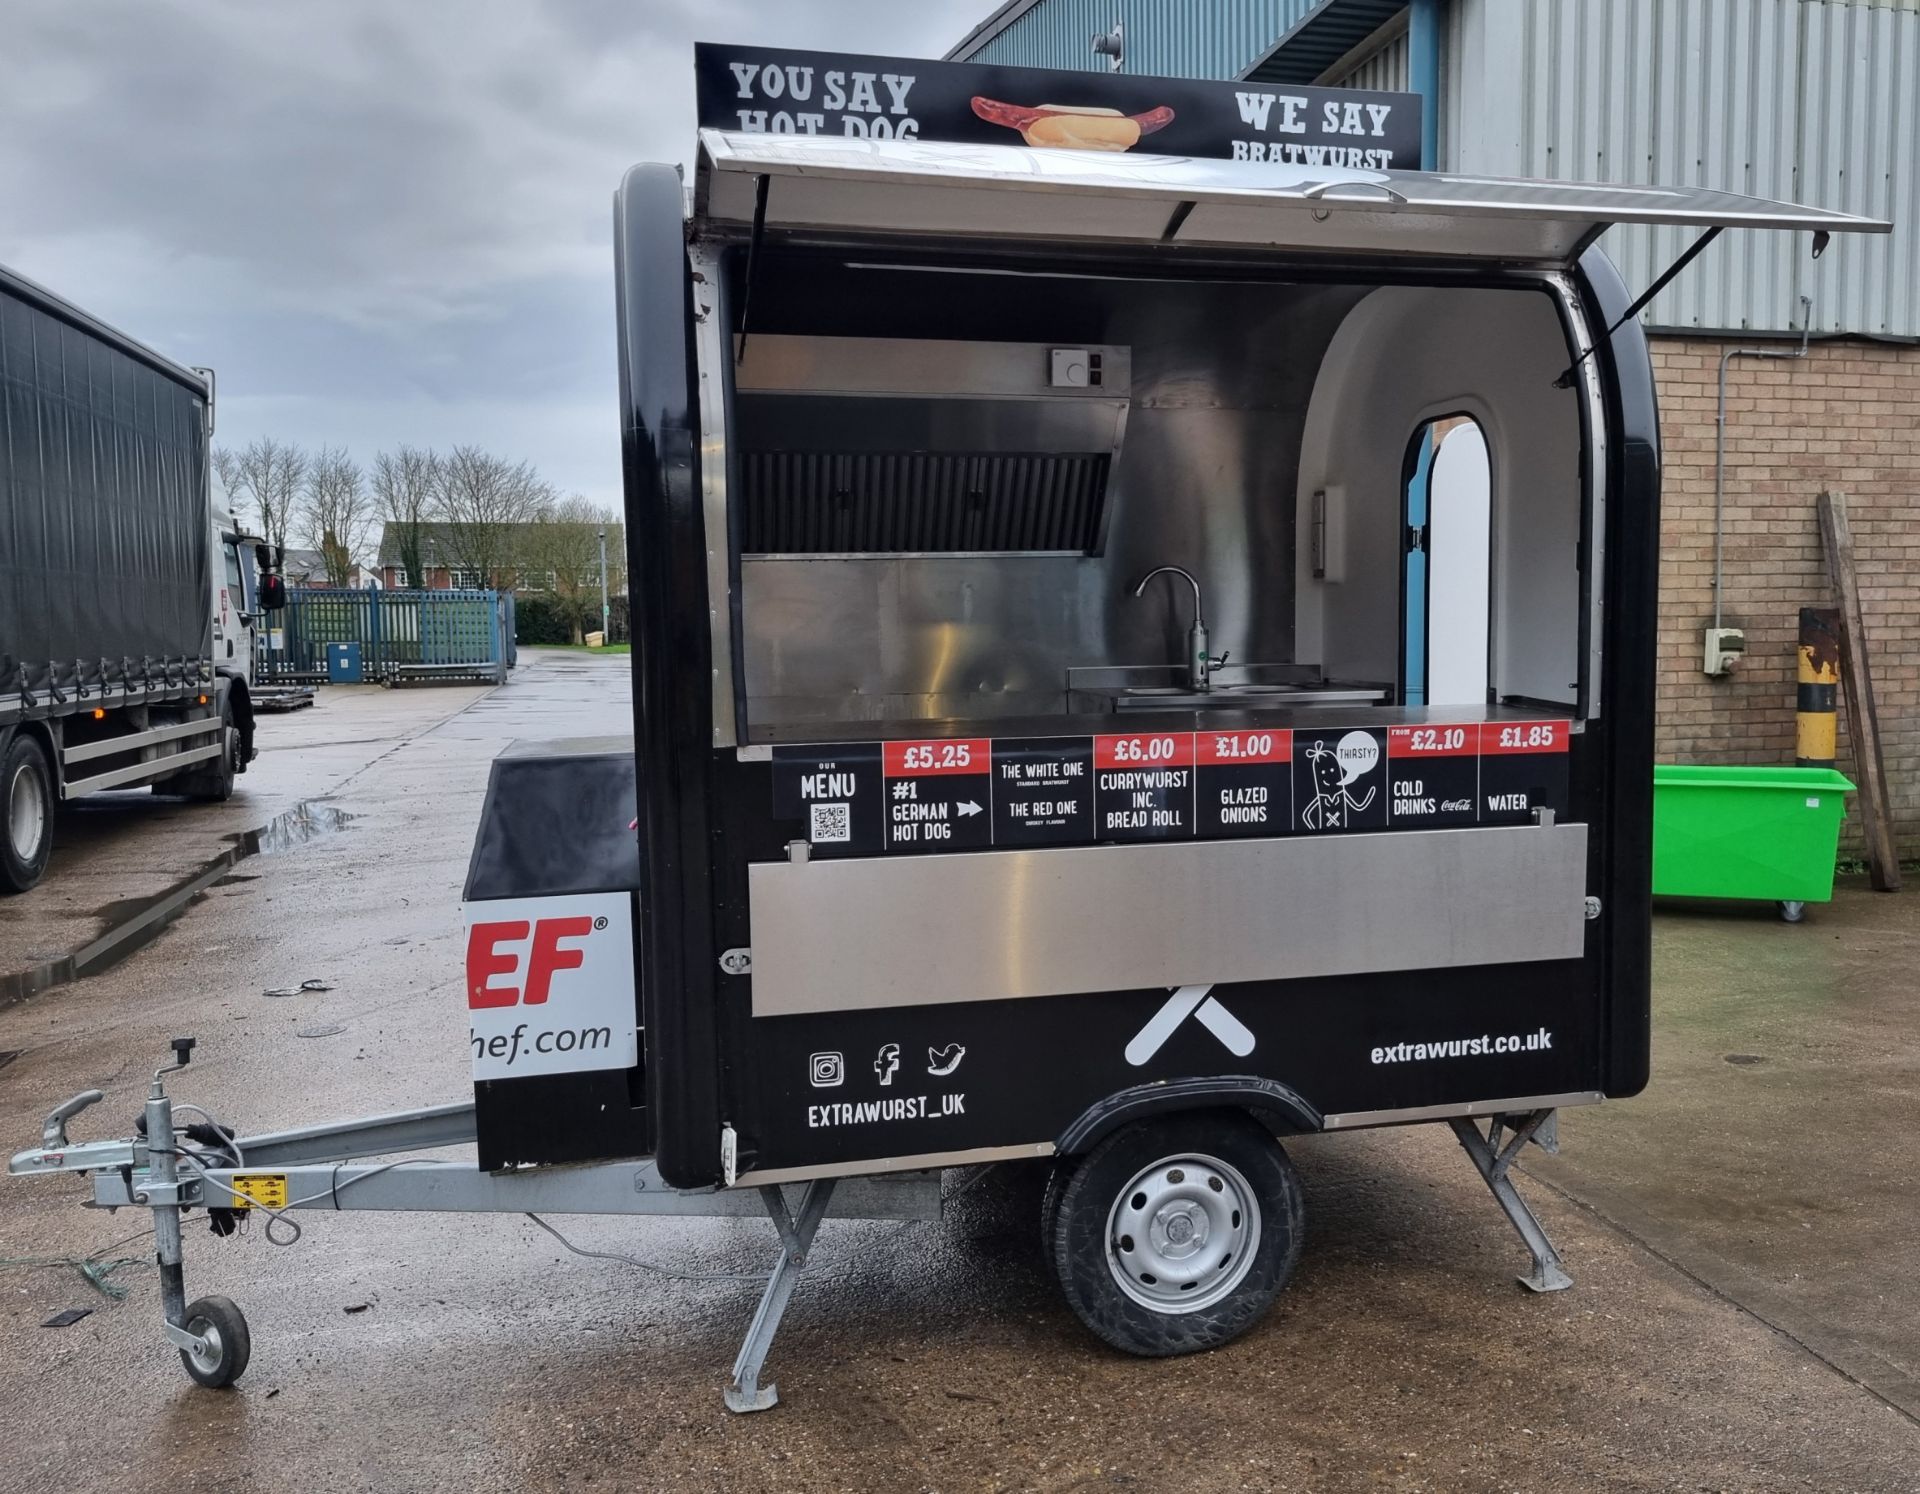 Omake single axle mobile catering trailer - 2018 - 750kg weight - W 3500 x D 2000 x H 3300 mm - Image 6 of 38